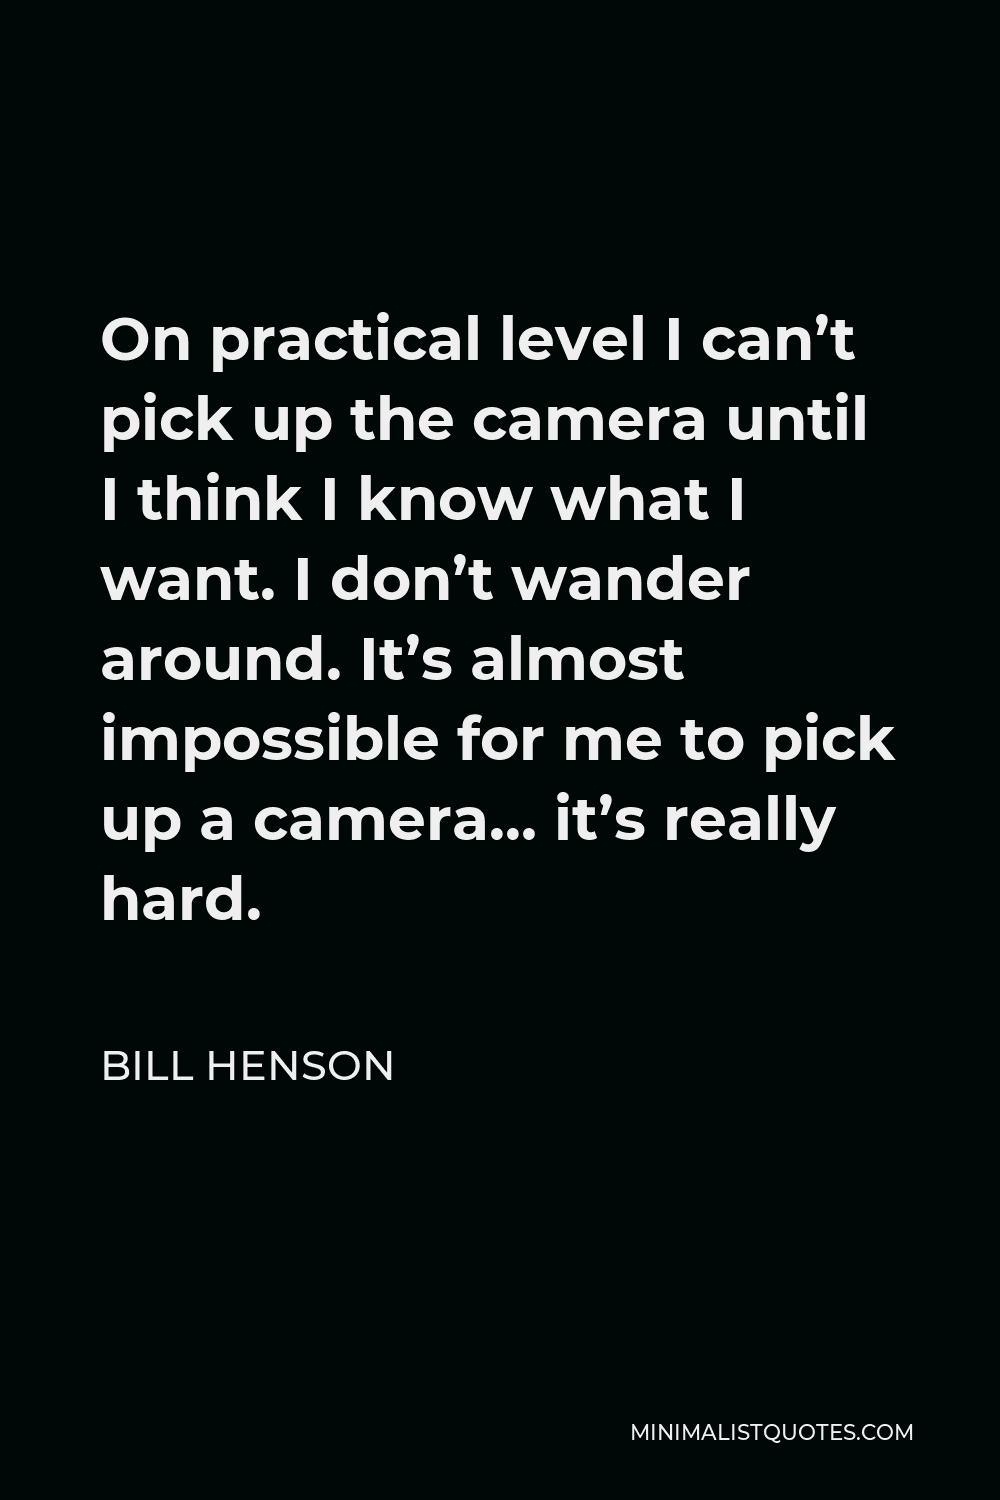 Bill Henson Quote - On practical level I can’t pick up the camera until I think I know what I want. I don’t wander around. It’s almost impossible for me to pick up a camera… it’s really hard.